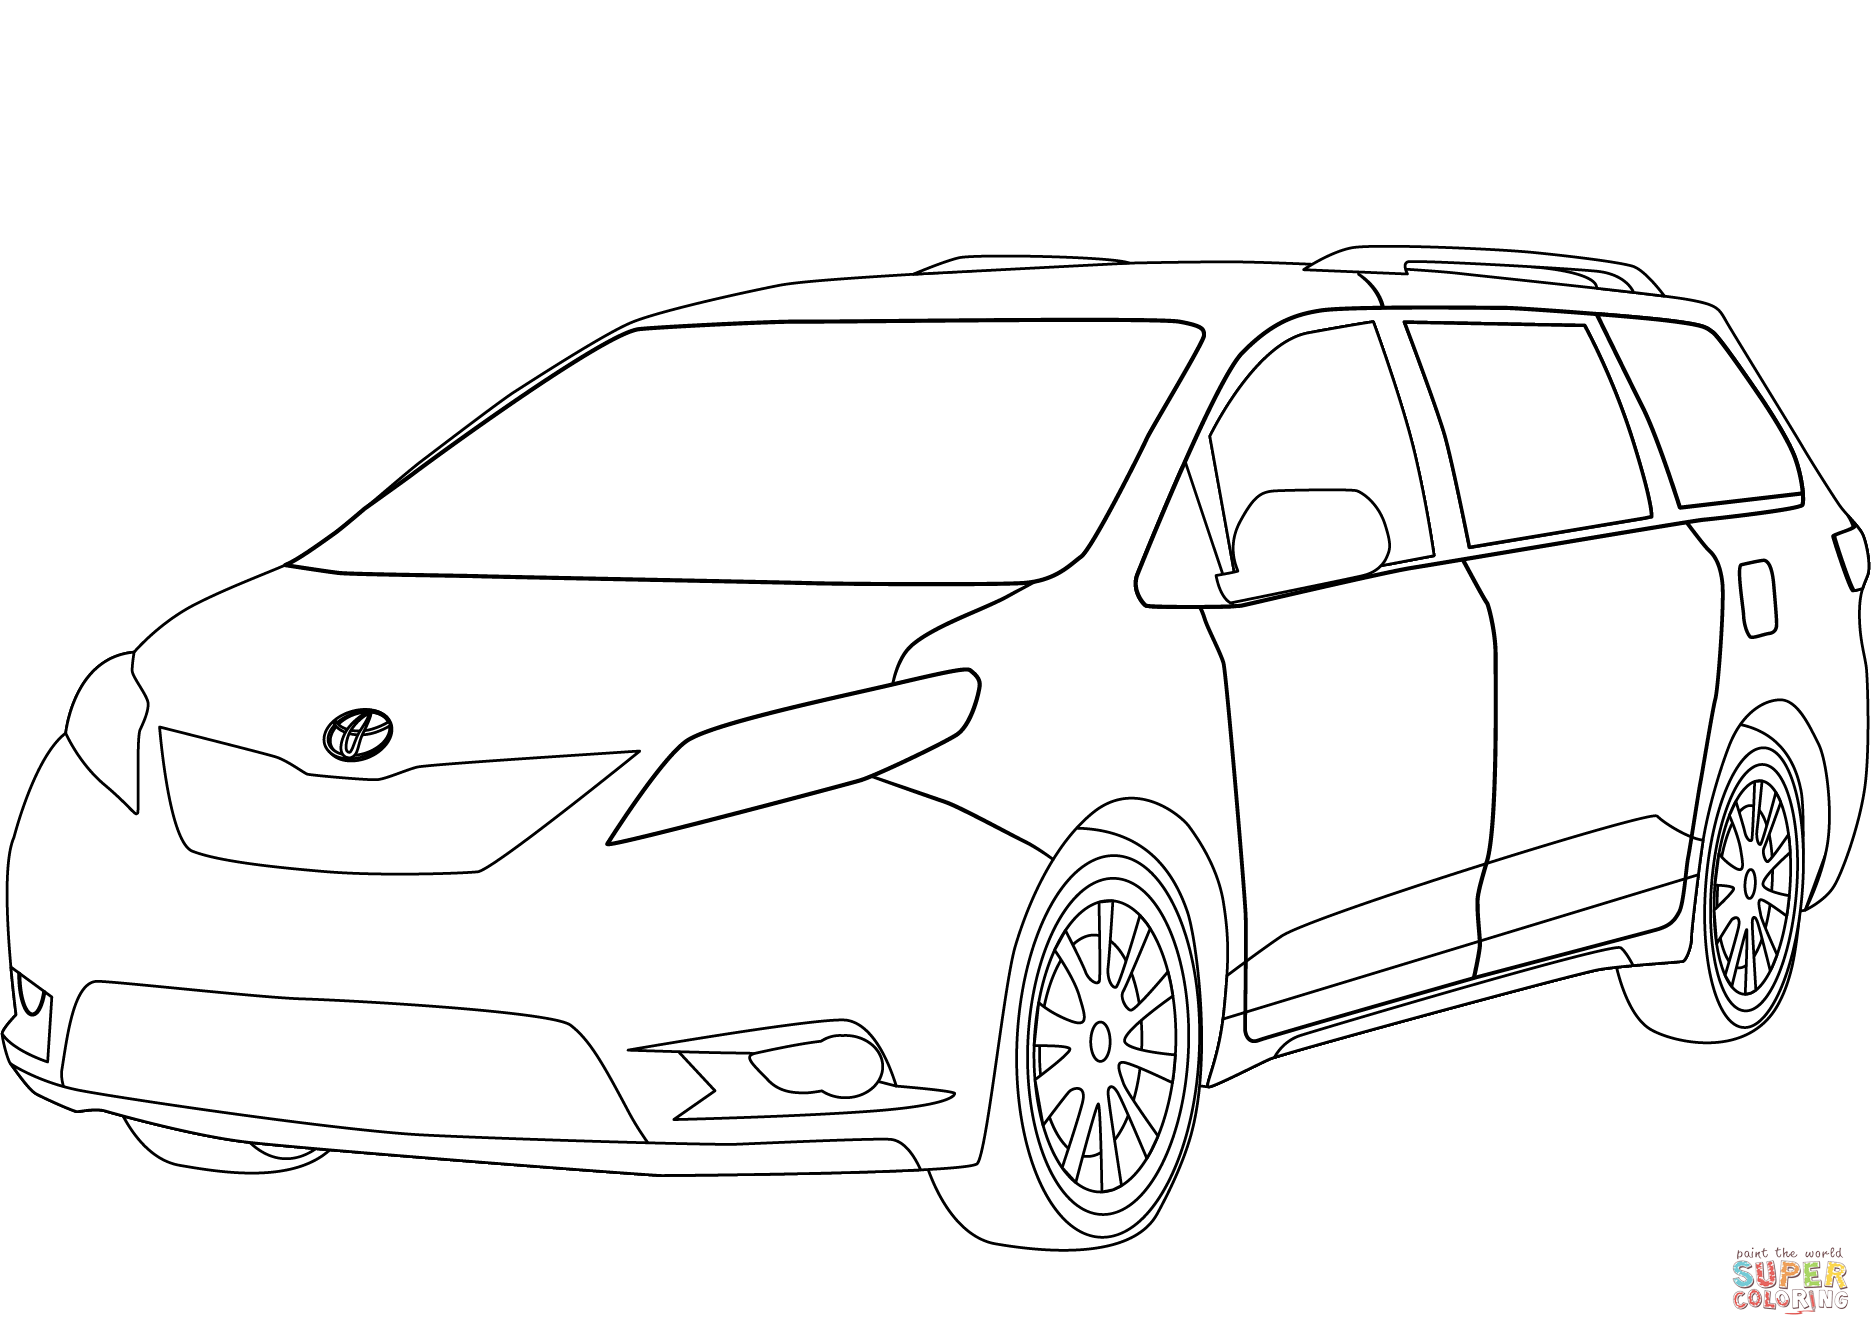 Toyota Sienna coloring page | Free Printable Coloring Pages